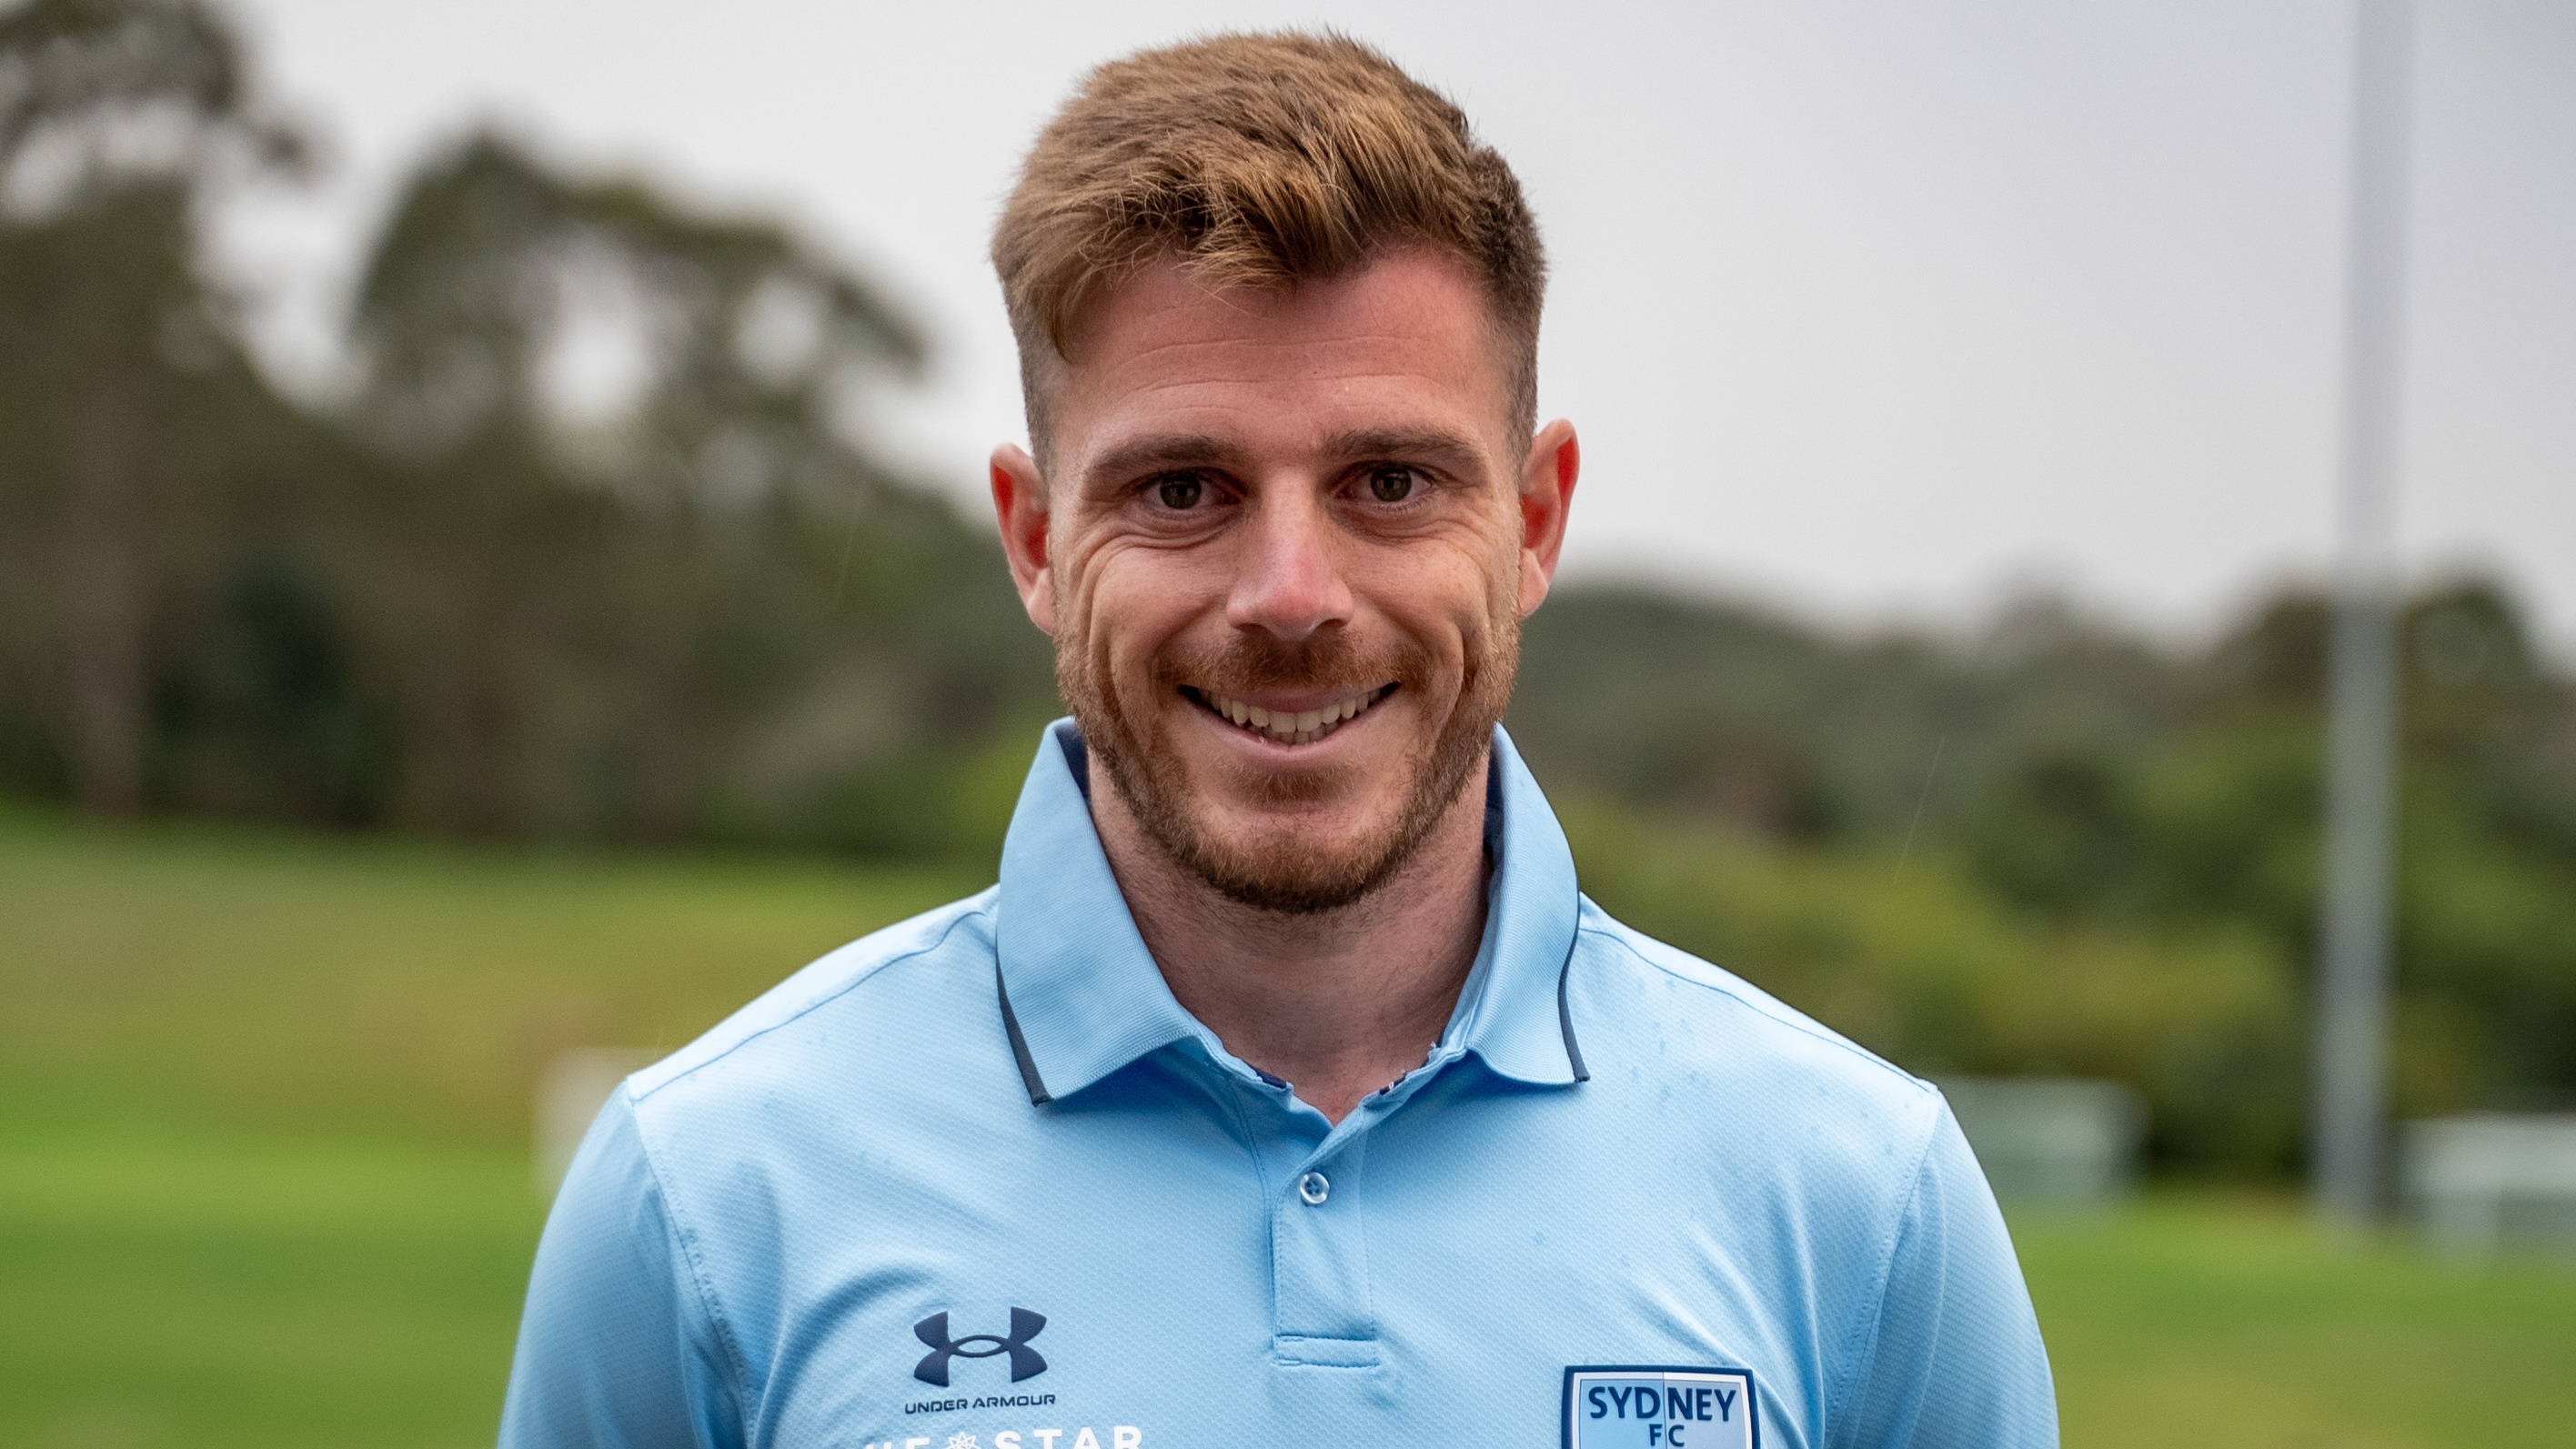 Sydney FC sign Spanish player to their A-League side